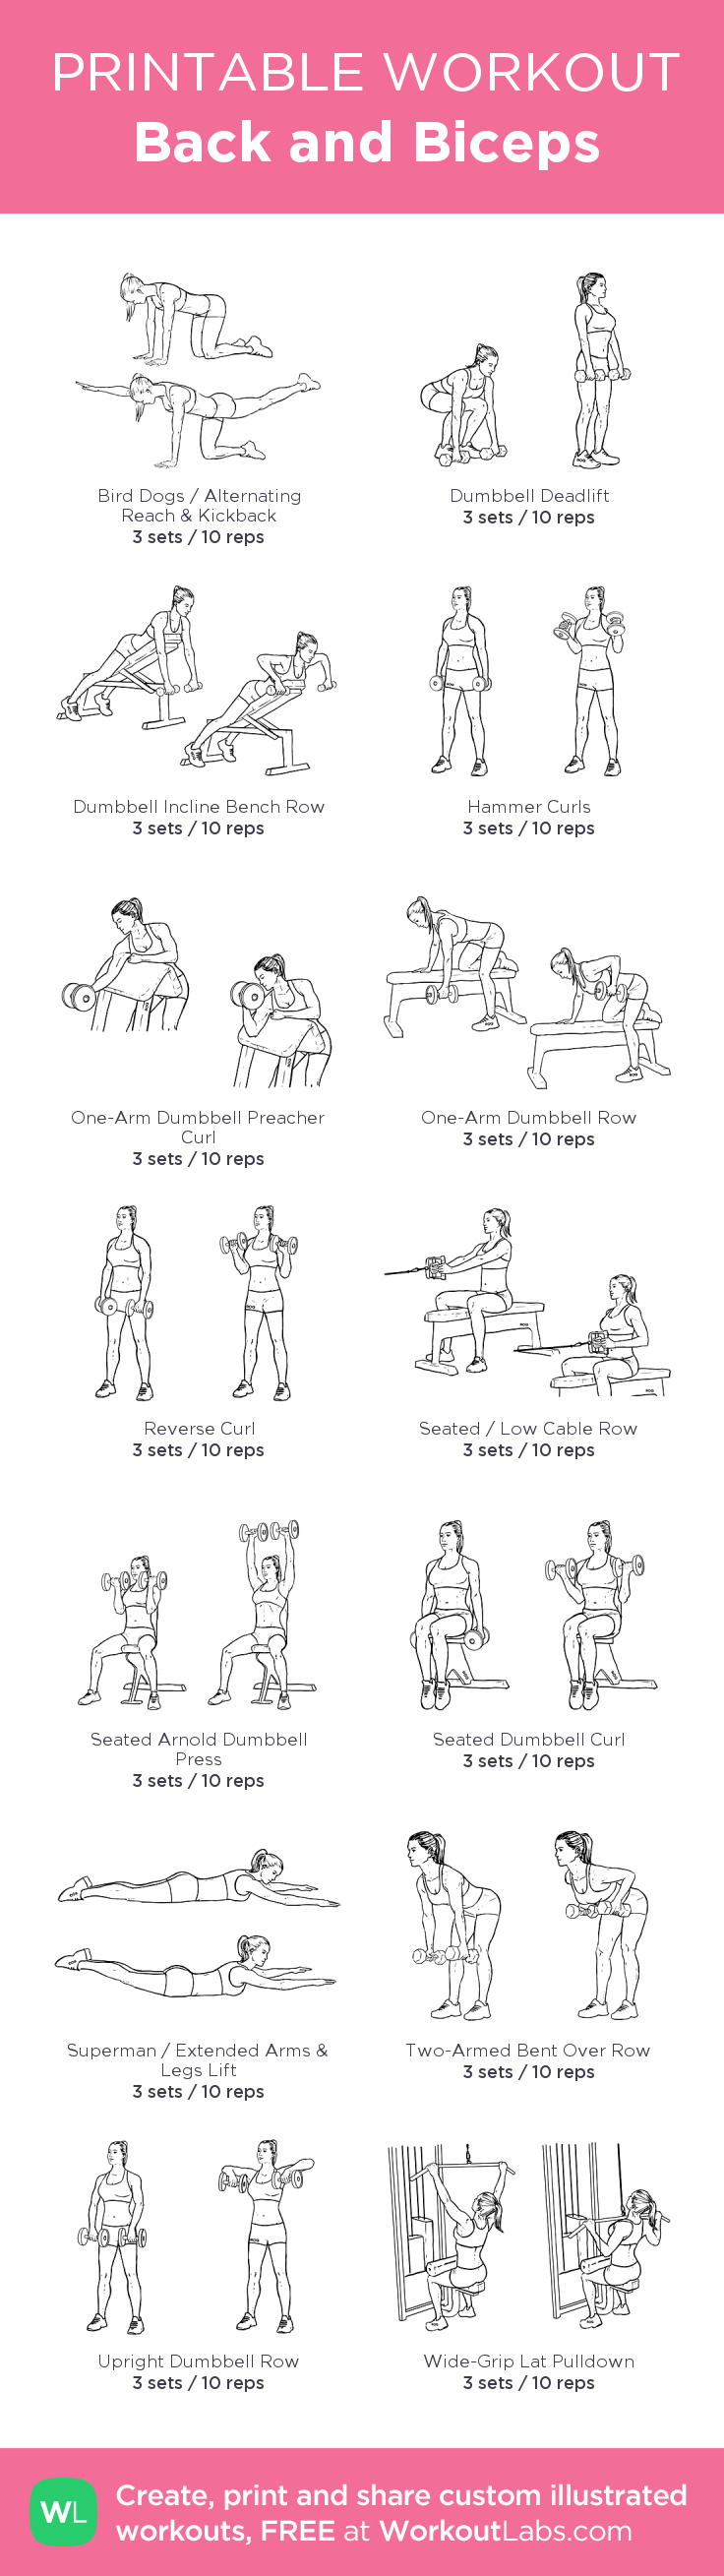 Back and Biceps – my custom workout created at WorkoutLabs.com • Click through to download as prin